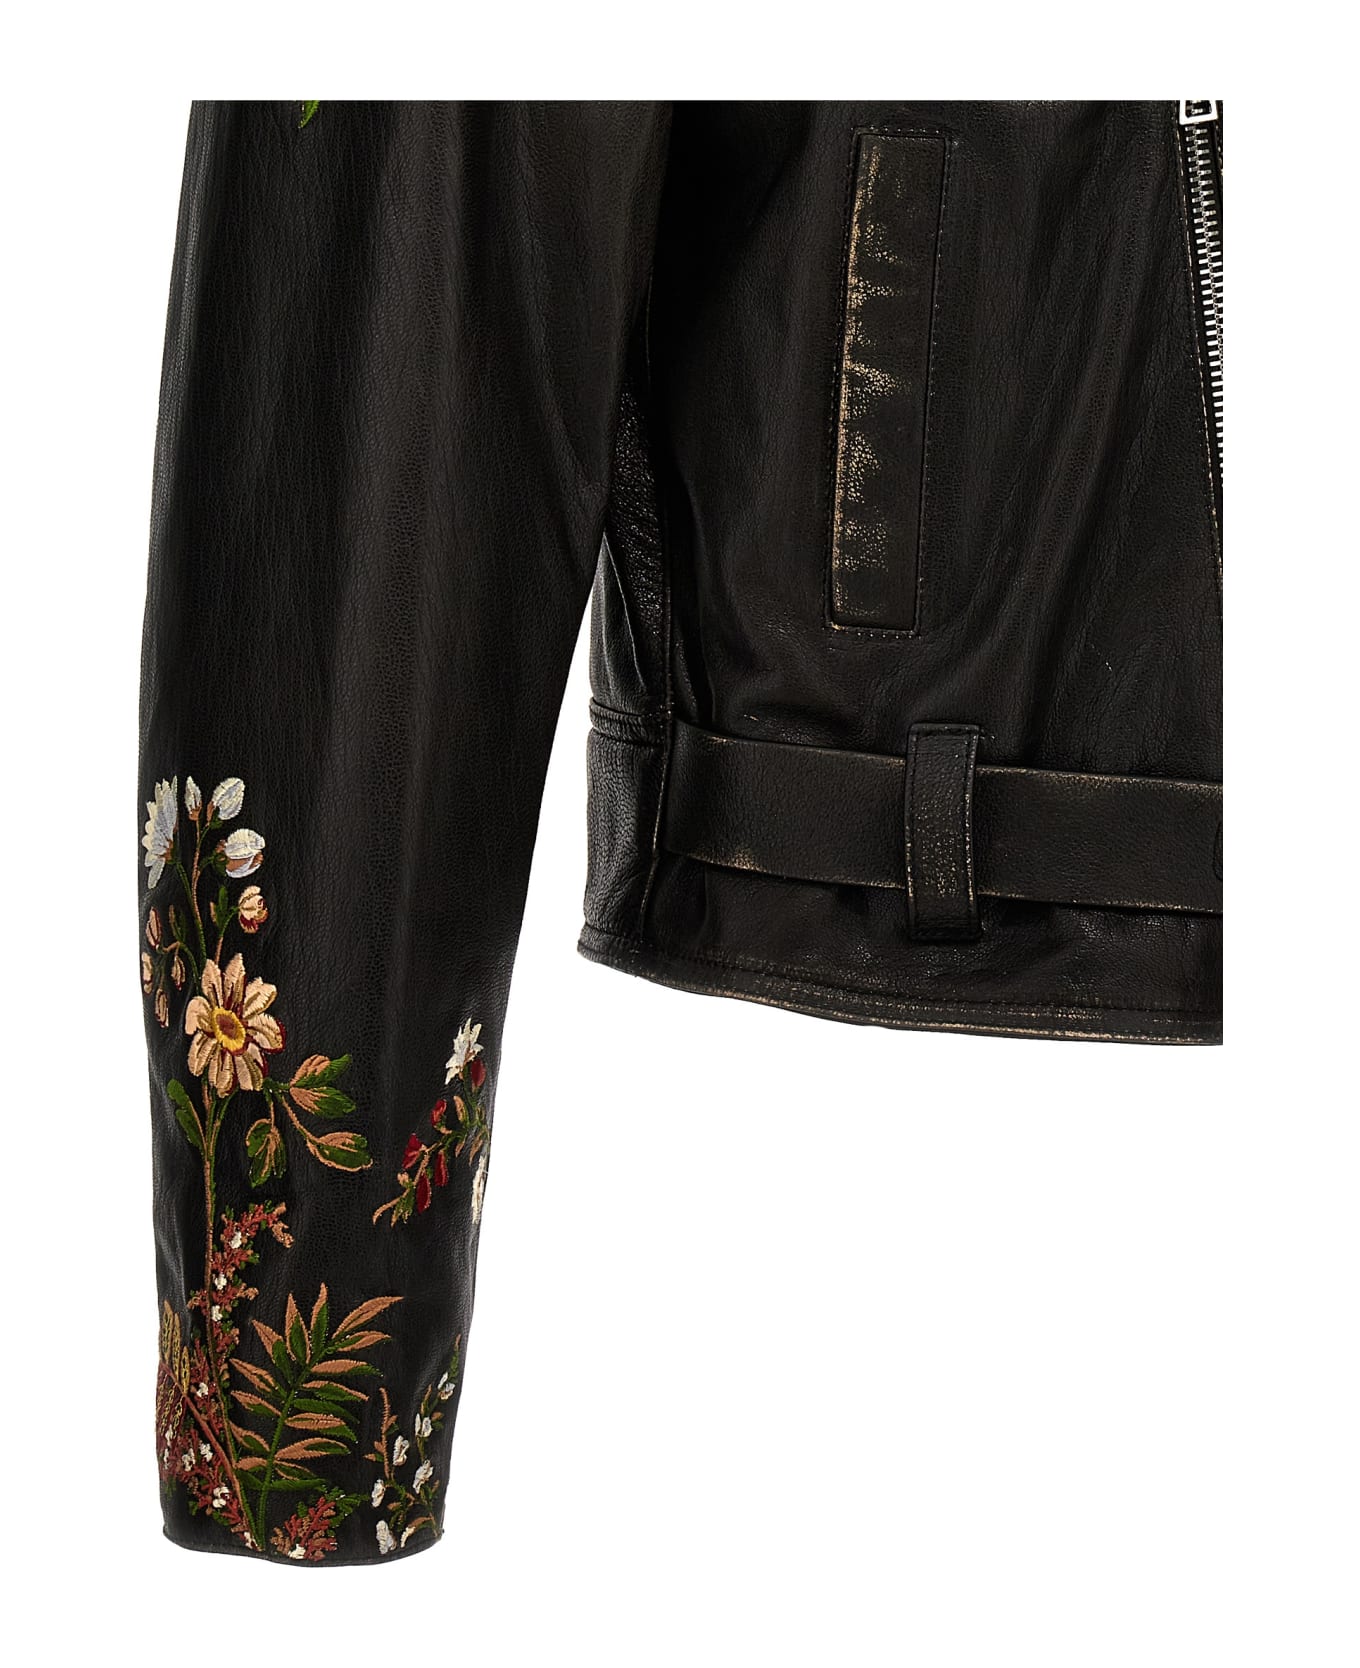 Etro Nail Floral Embroidery - Black